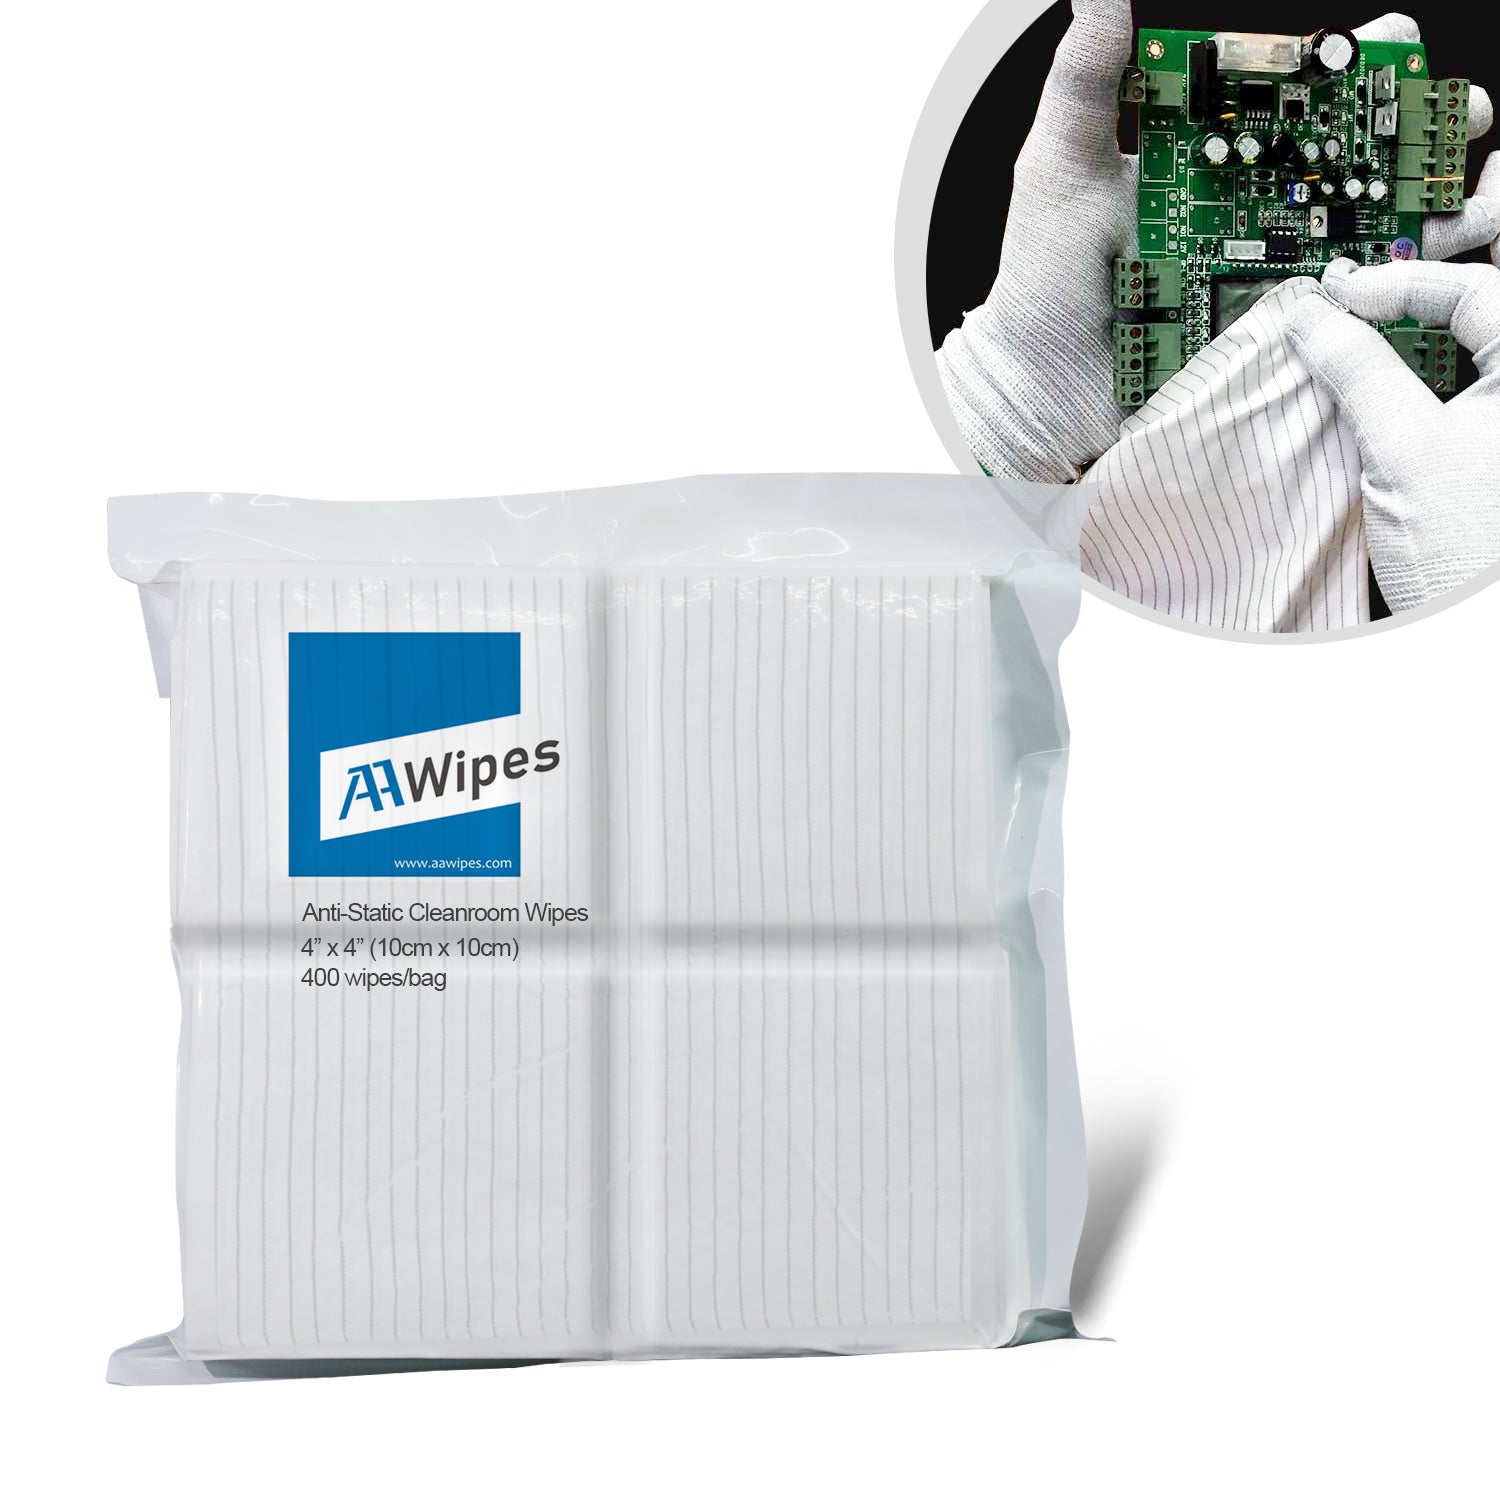 Ultra-low Lint Wiper Aerospace Sensative Surface Wiping Cleanroom cloth Anti-Static ESD Wipes 4"x4"  (Starting at 1 Box with 8,000 Wipes per 20 Bags) (No. CE16004)